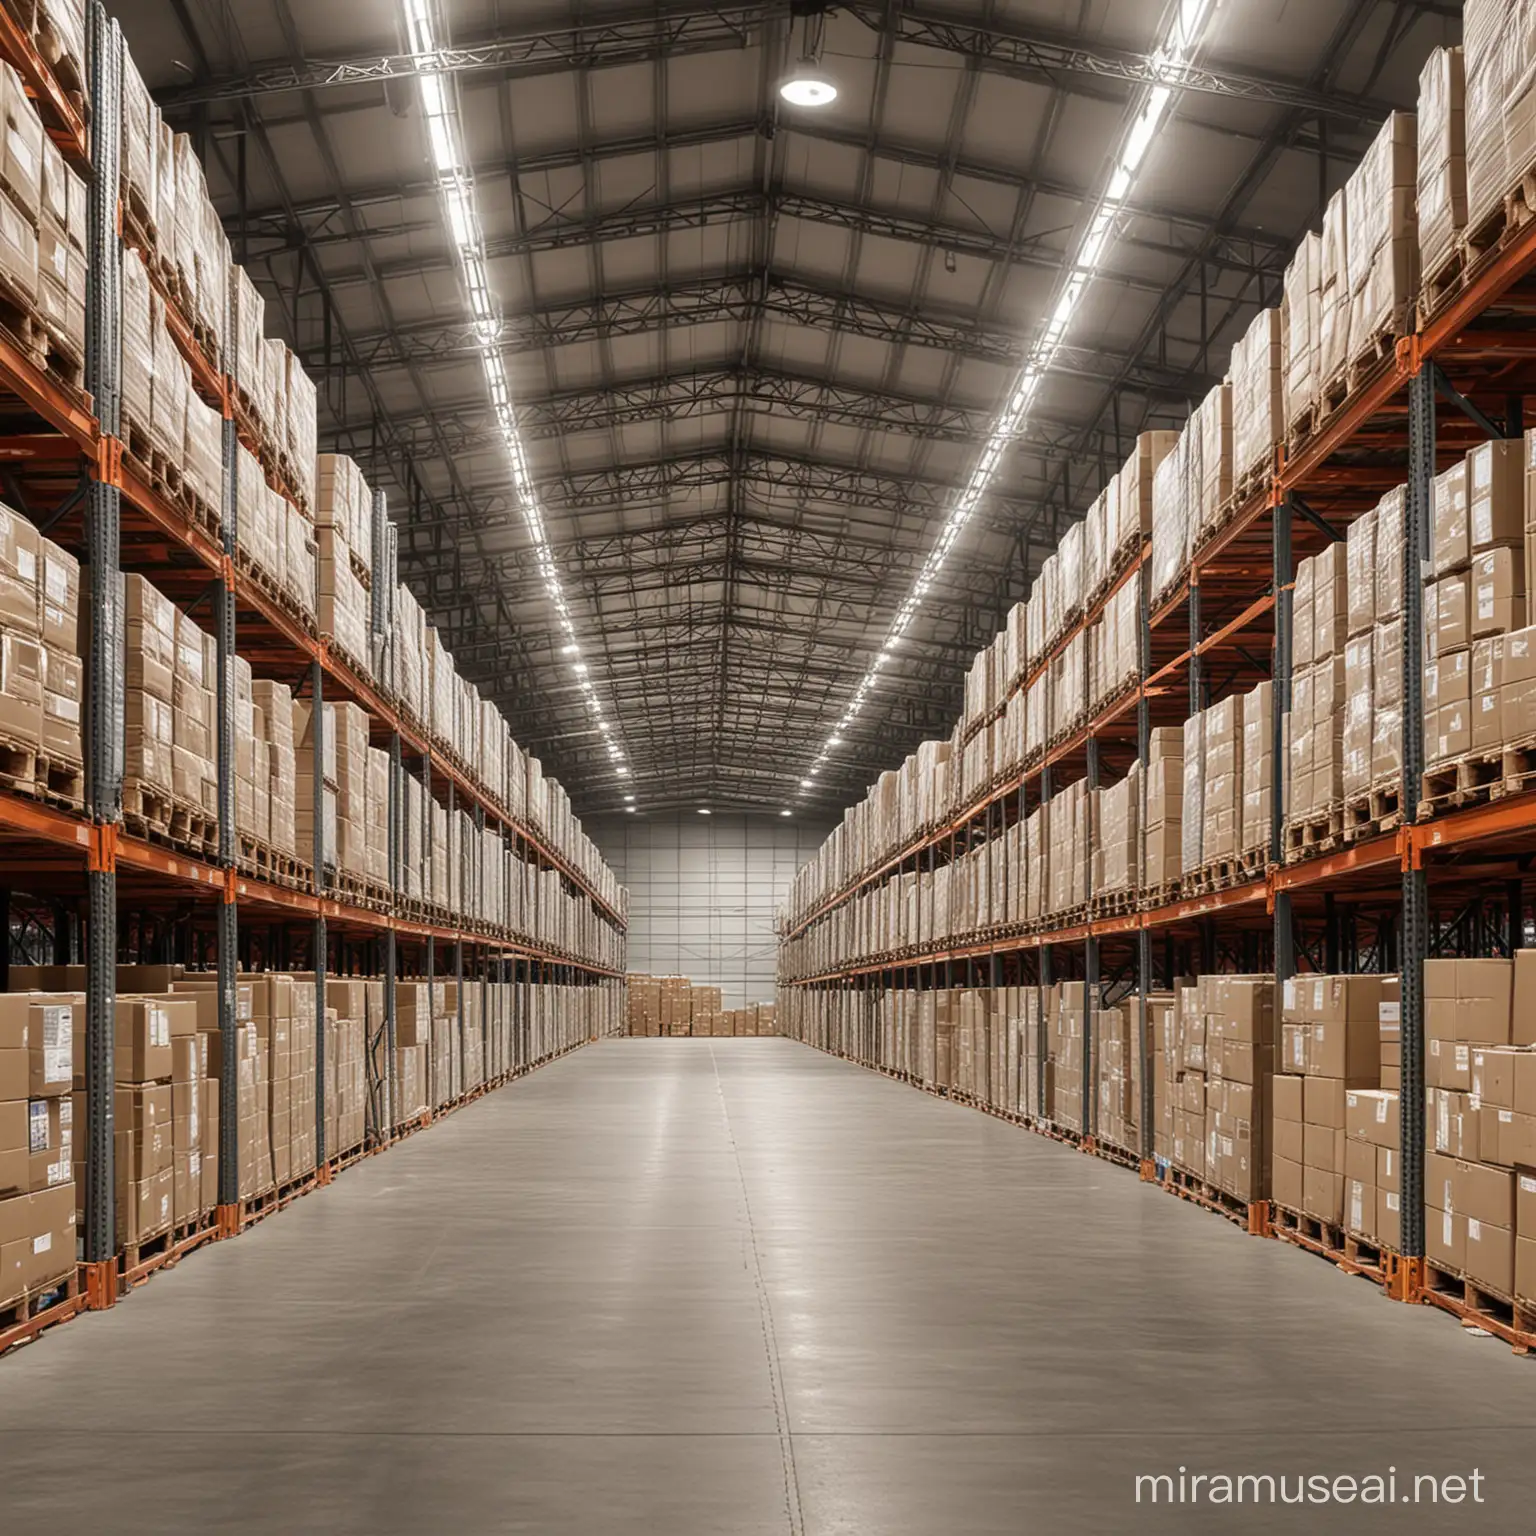 Efficient Warehousing and Distribution Operations